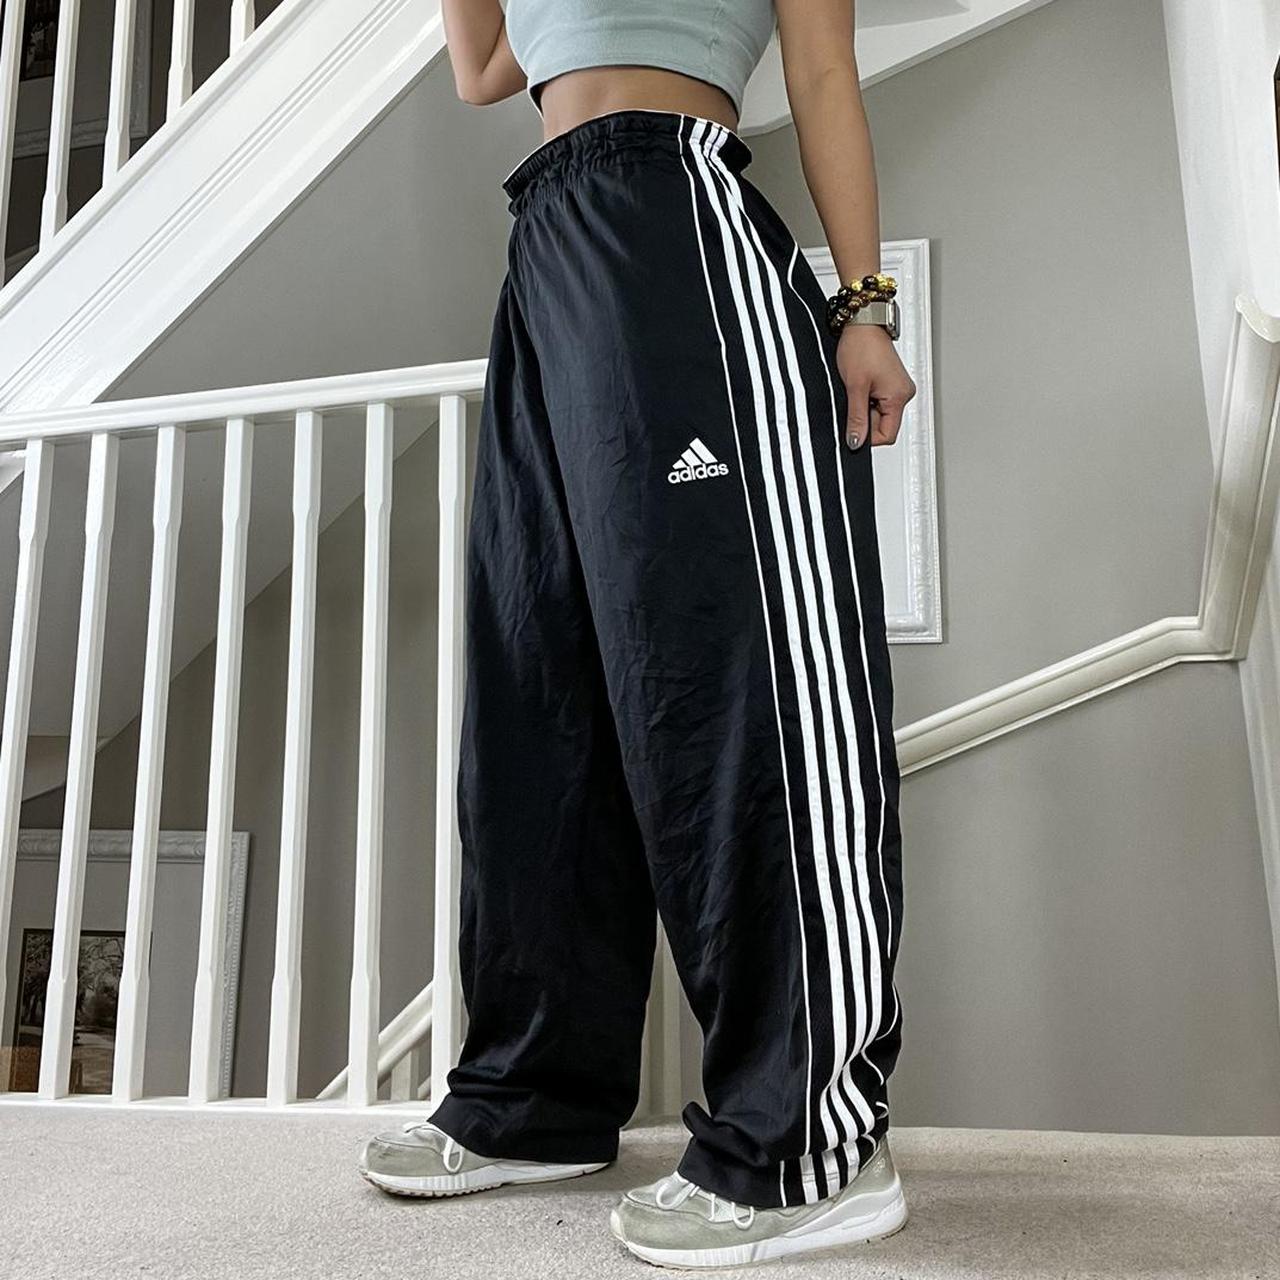 Adidas Women's Black and White Trousers | Depop